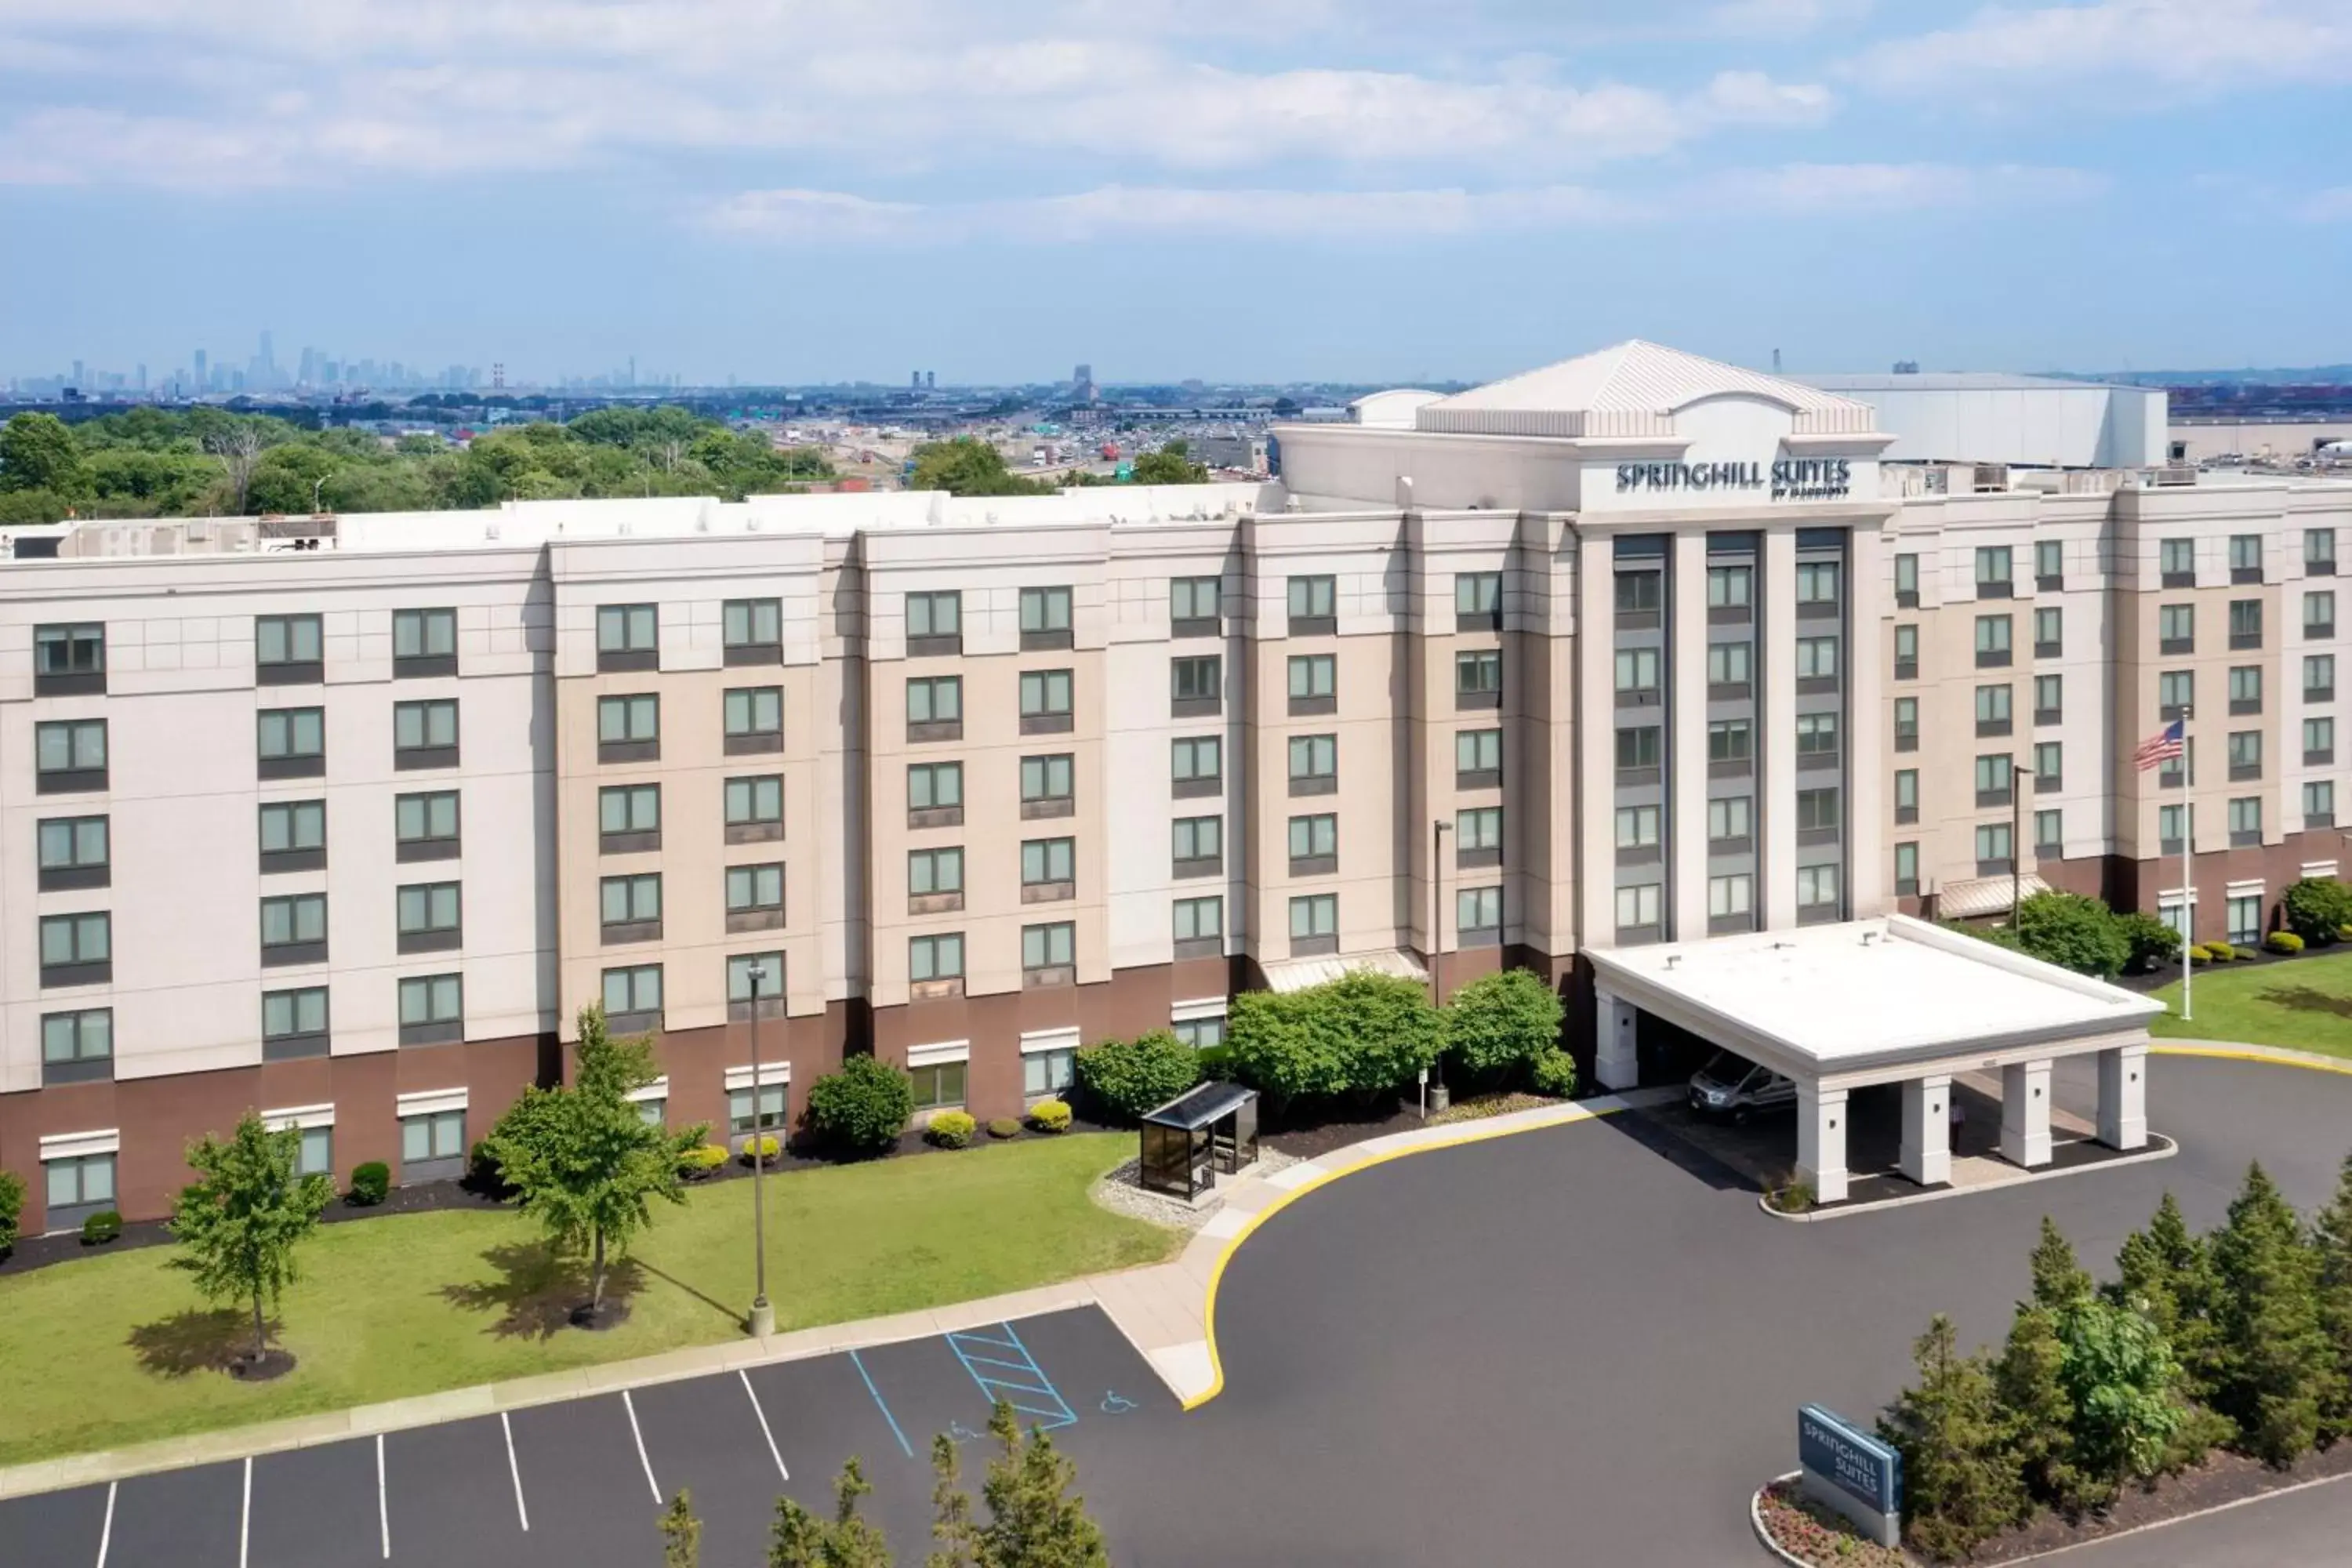 Property building in SpringHill Suites by Marriott Newark International Airport